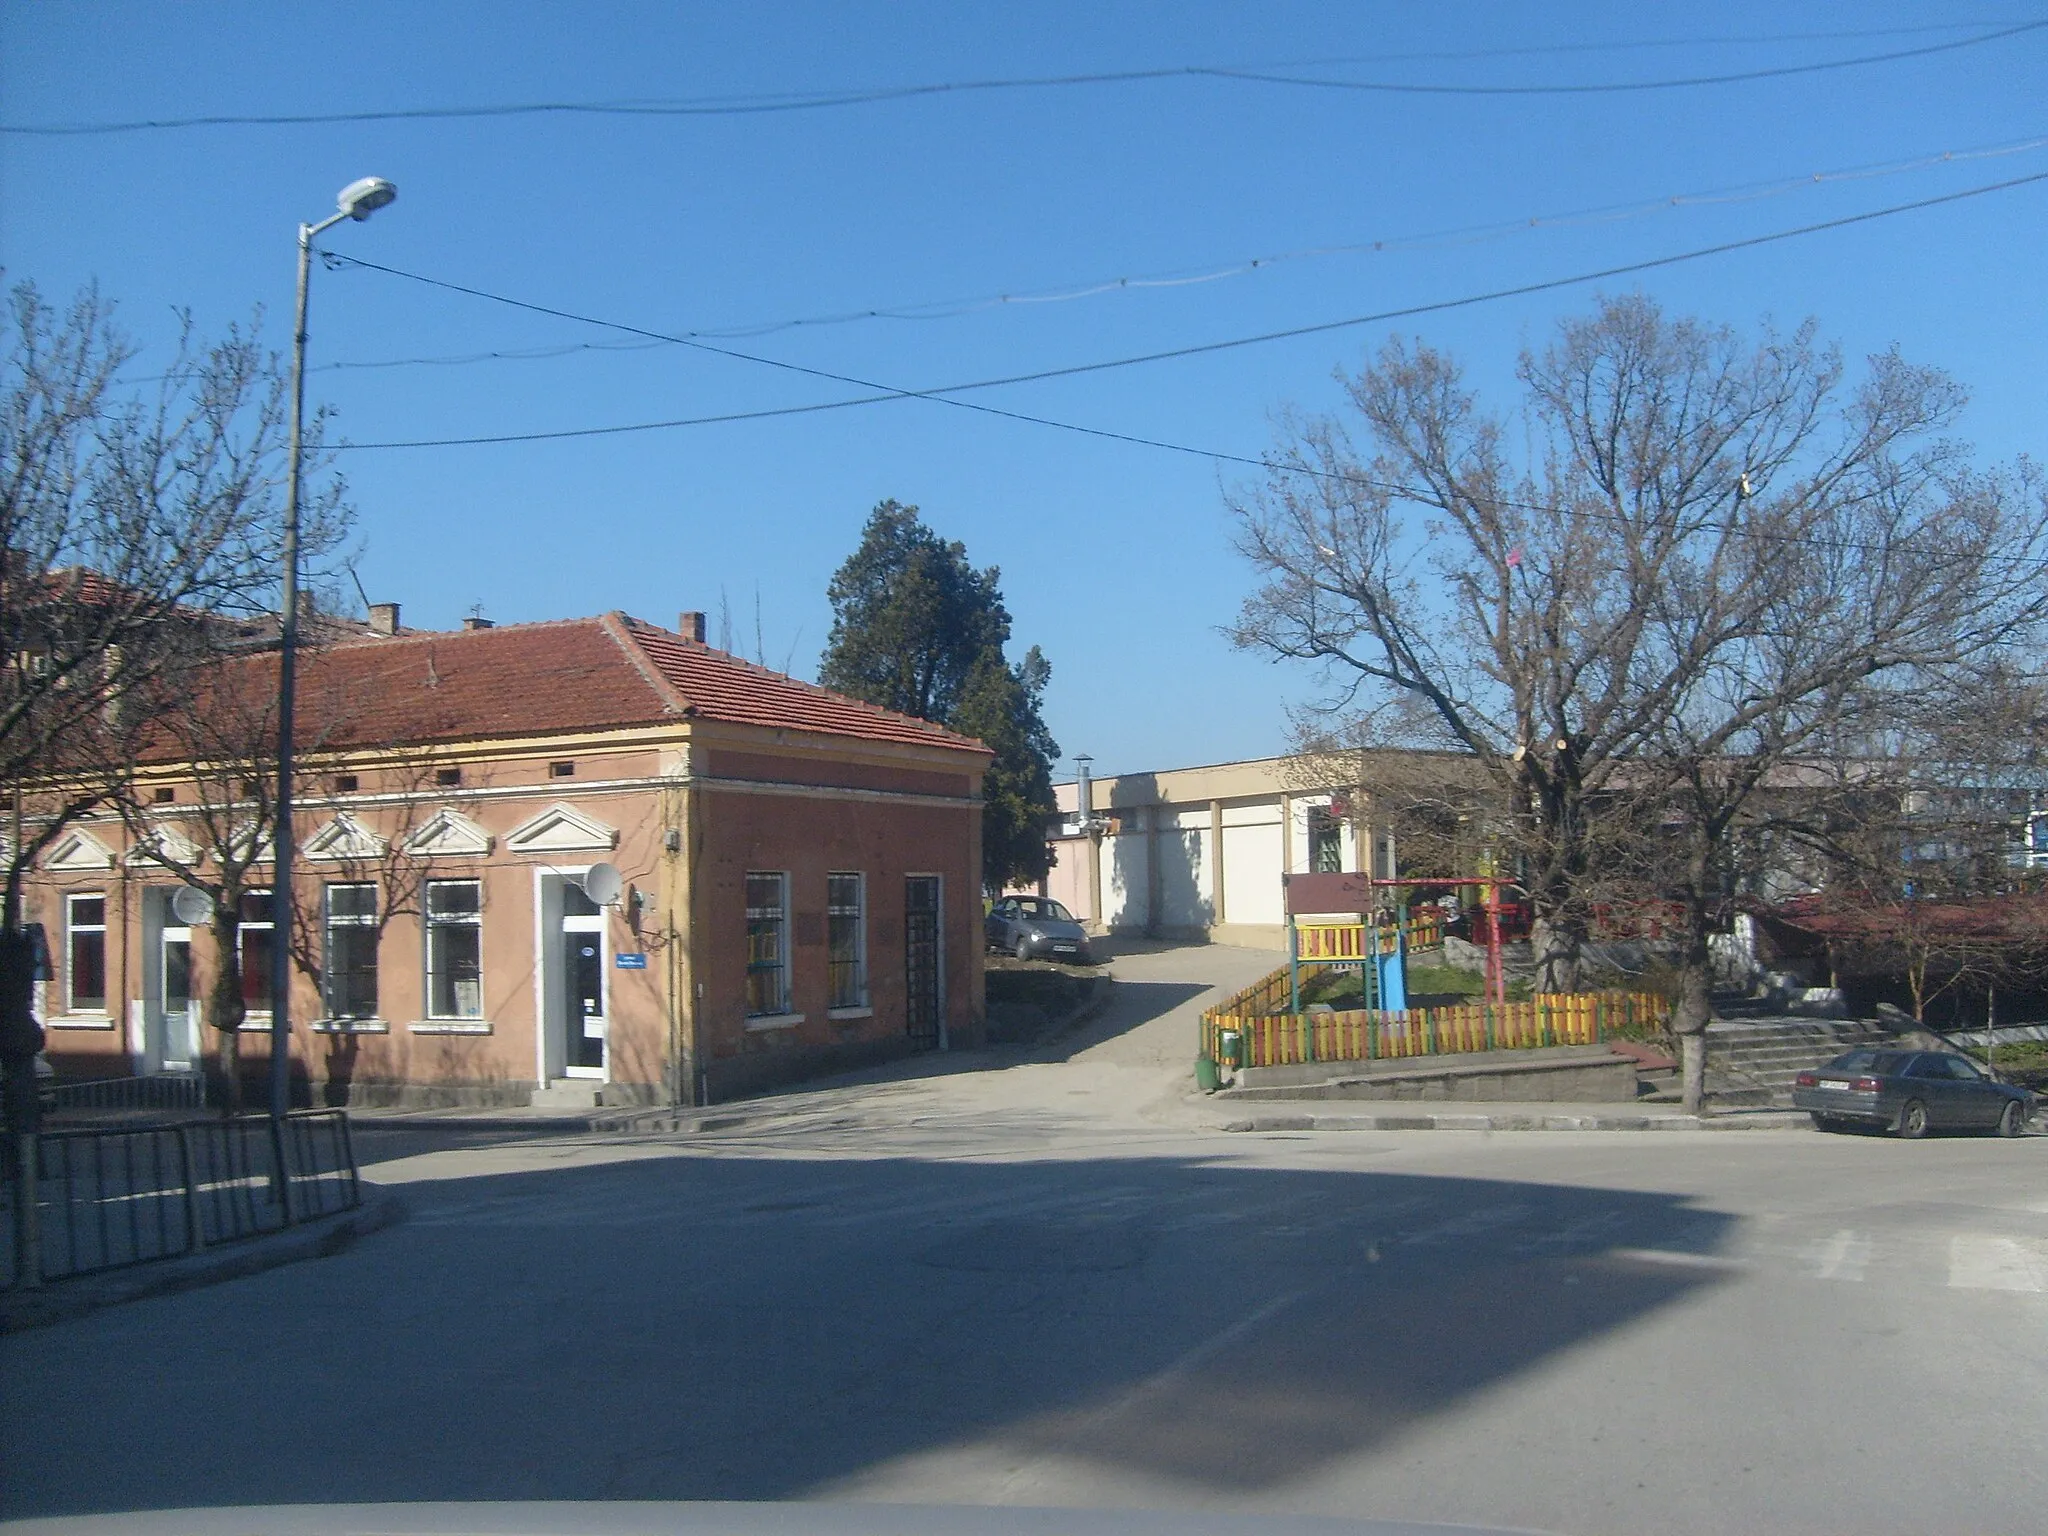 Photo showing: Oryahovo, a town on the Bulgarian bank of the Danube